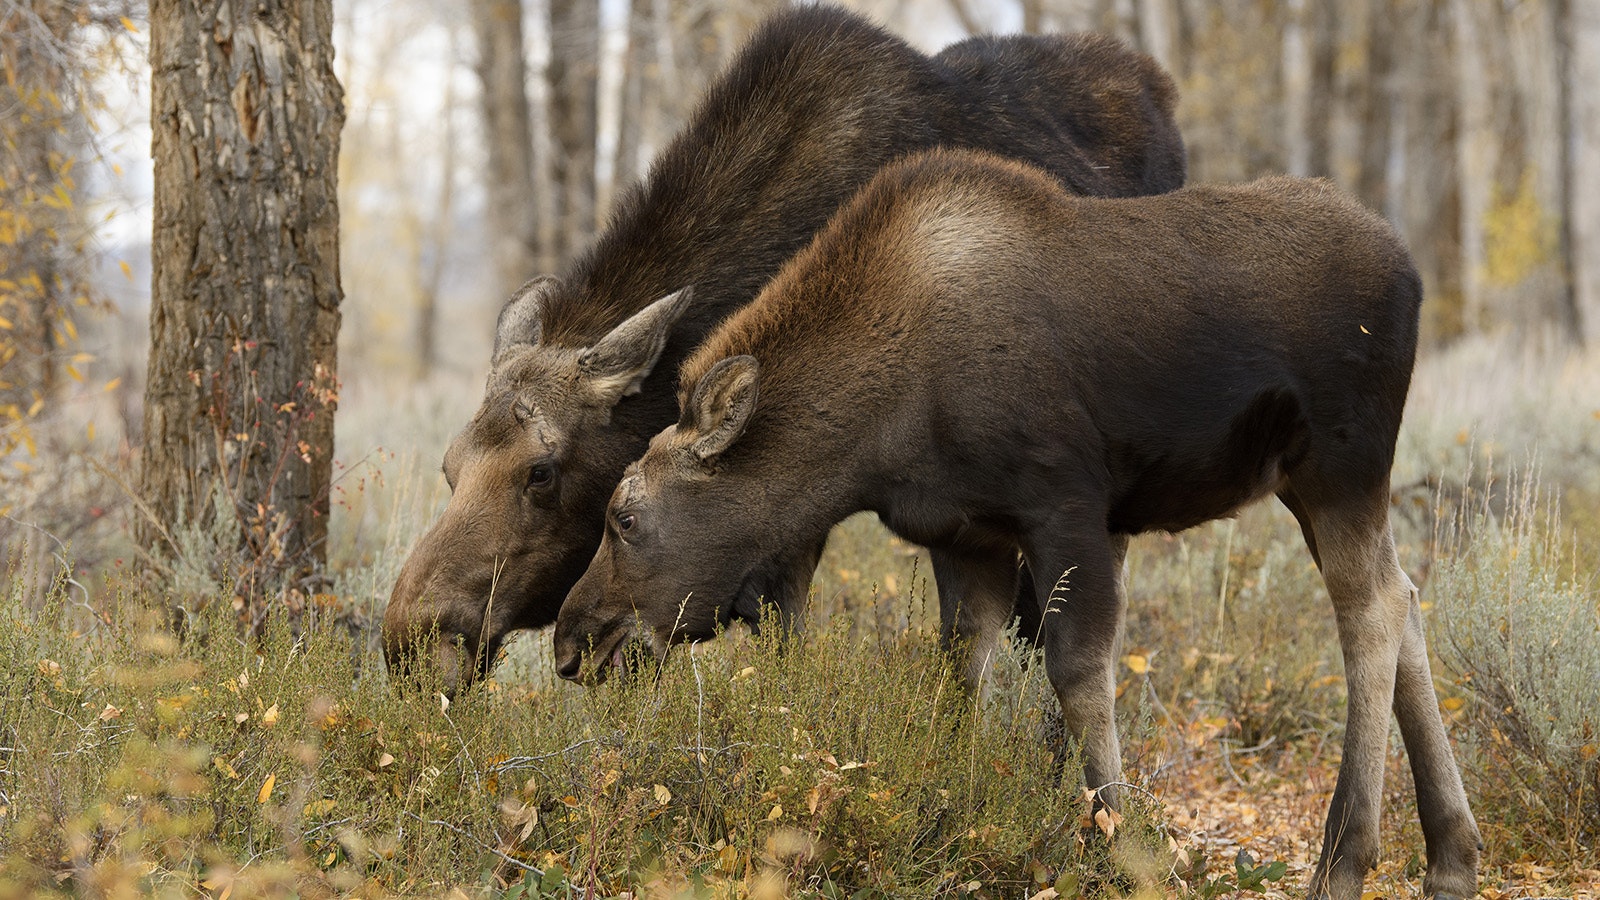 Wyoming’s moose are nothing to trifle with, especially female moose with calves to protect.